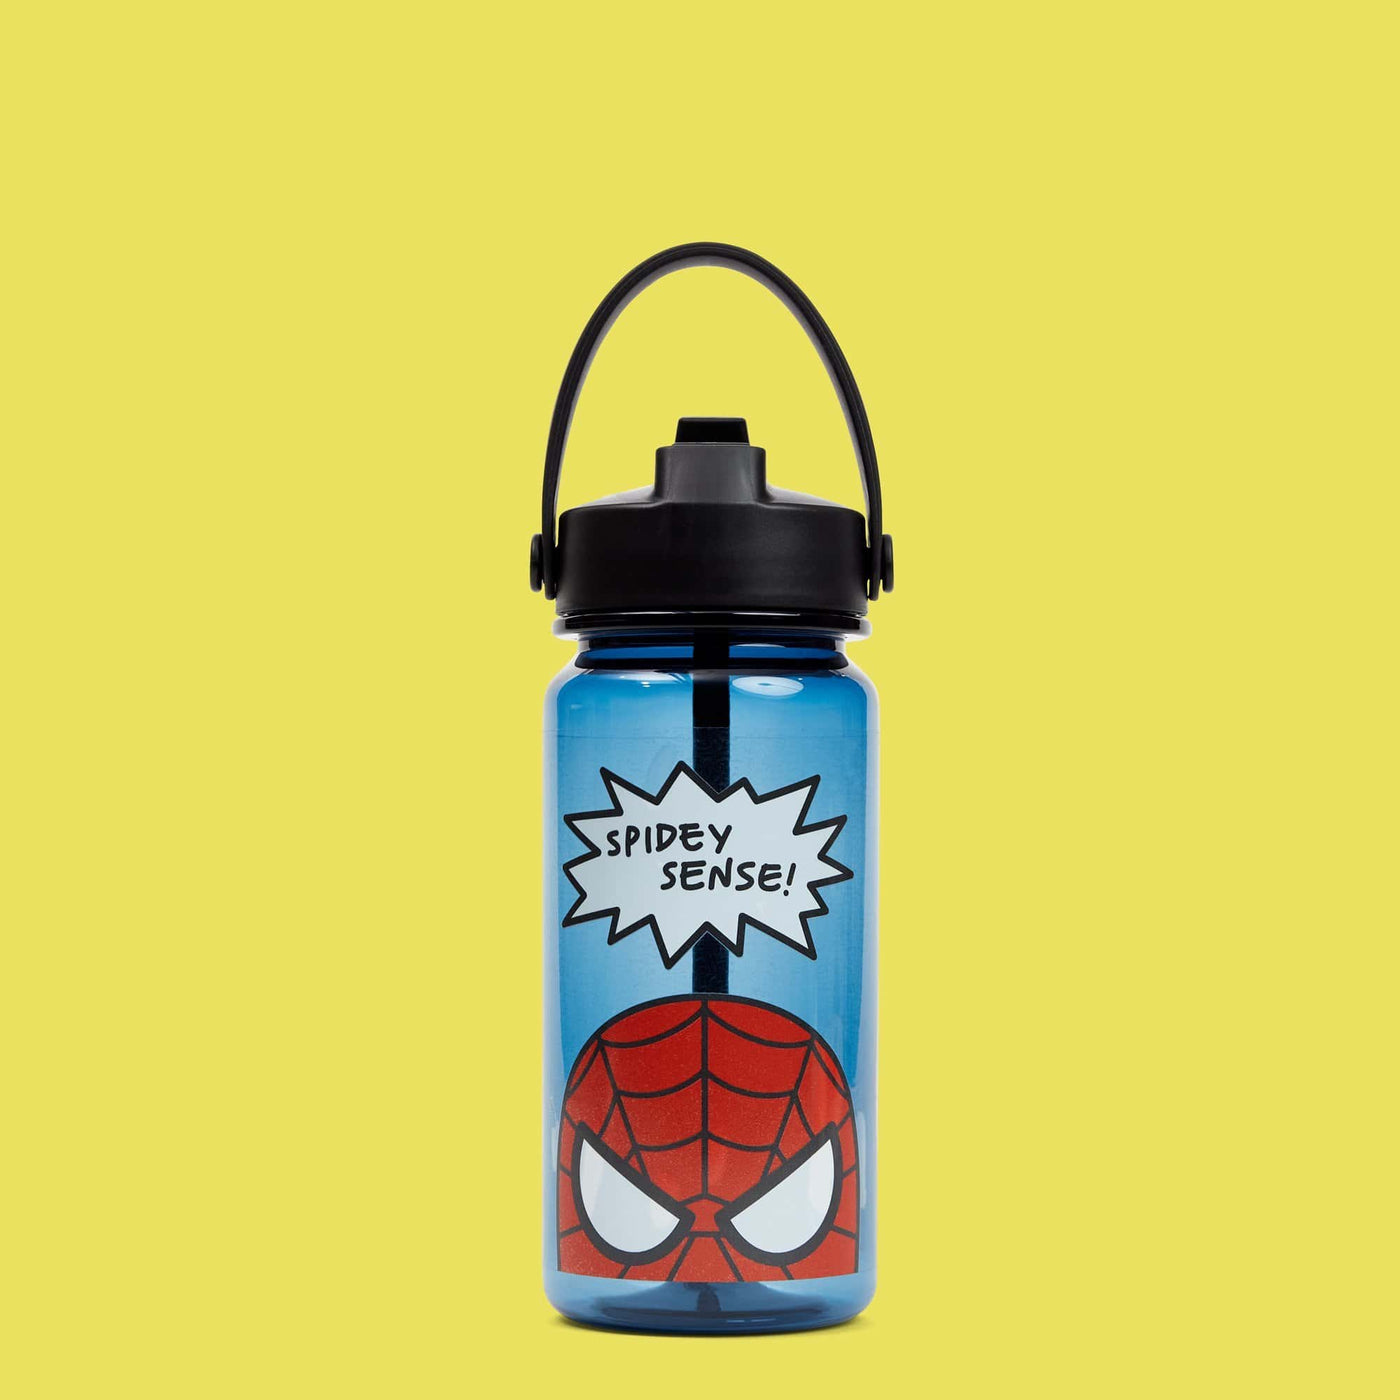 blue water bottle with red cartoon Spider-Man face and speech bubble that says "Spidey Sense!"